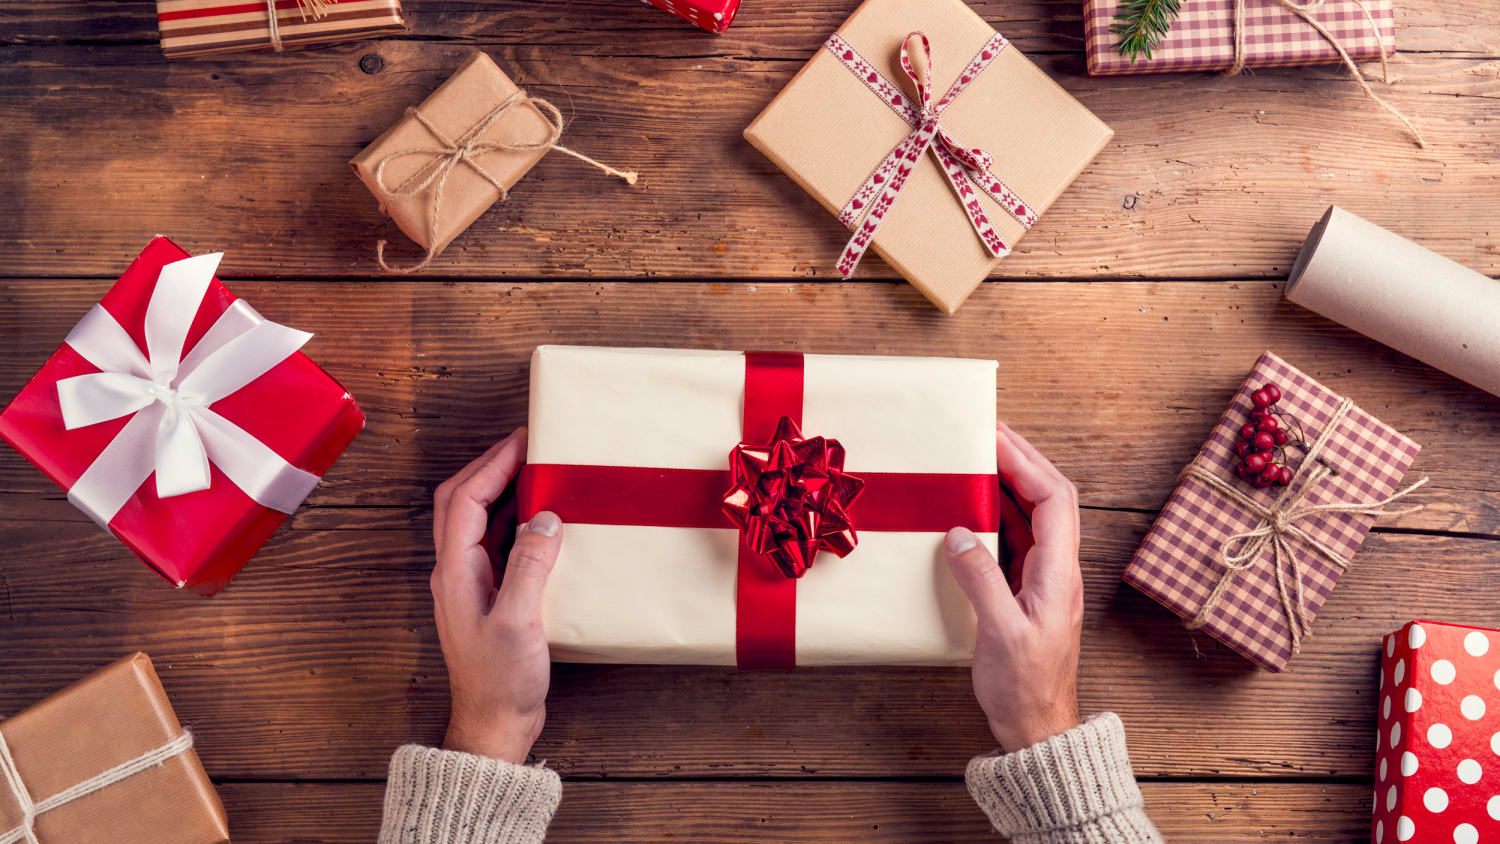 Men's Gift Guide - Gifts for every guy on your list!